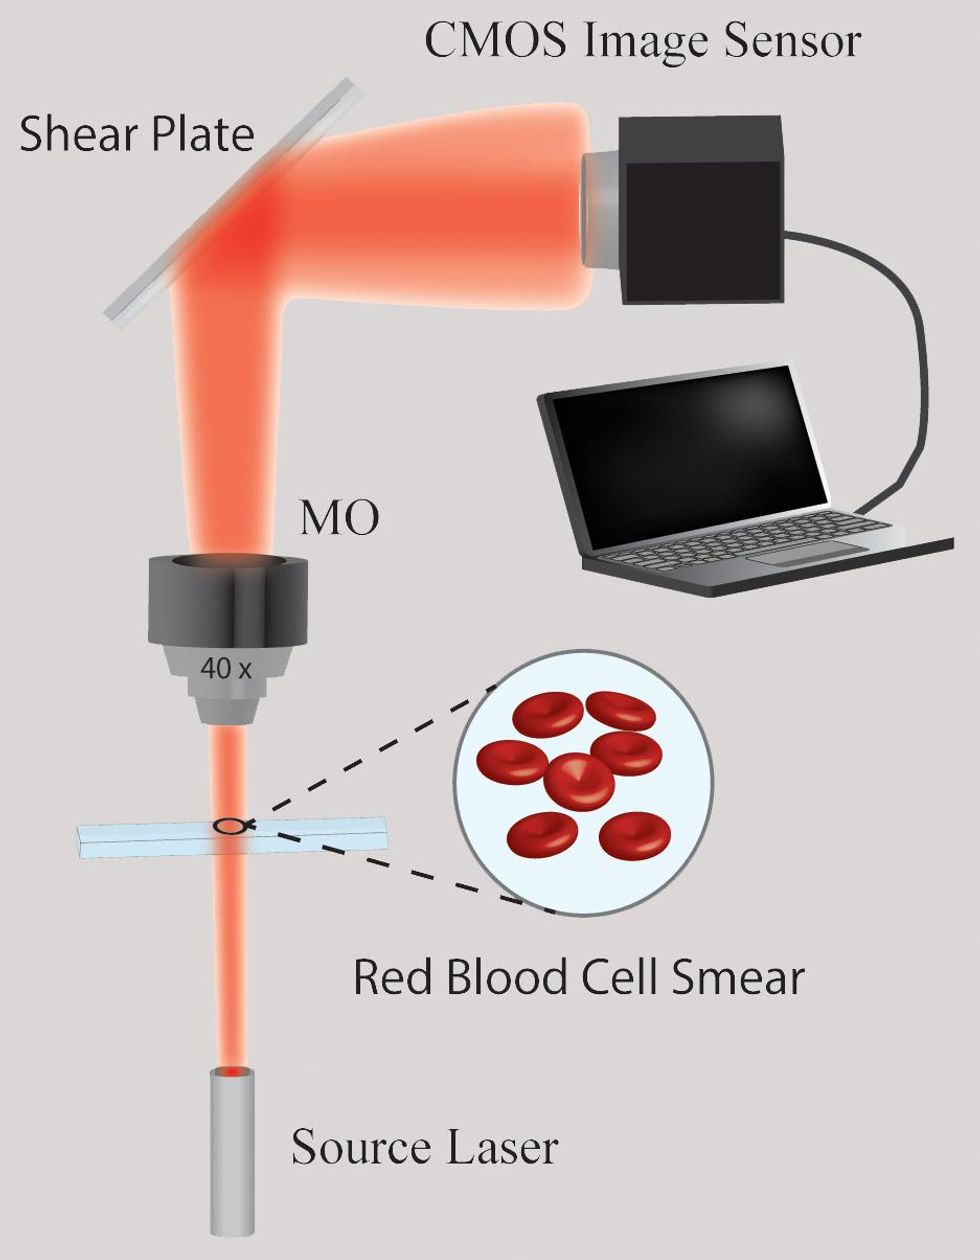 An illustration of how the light emitted from the laser diode illuminates the red blood cells